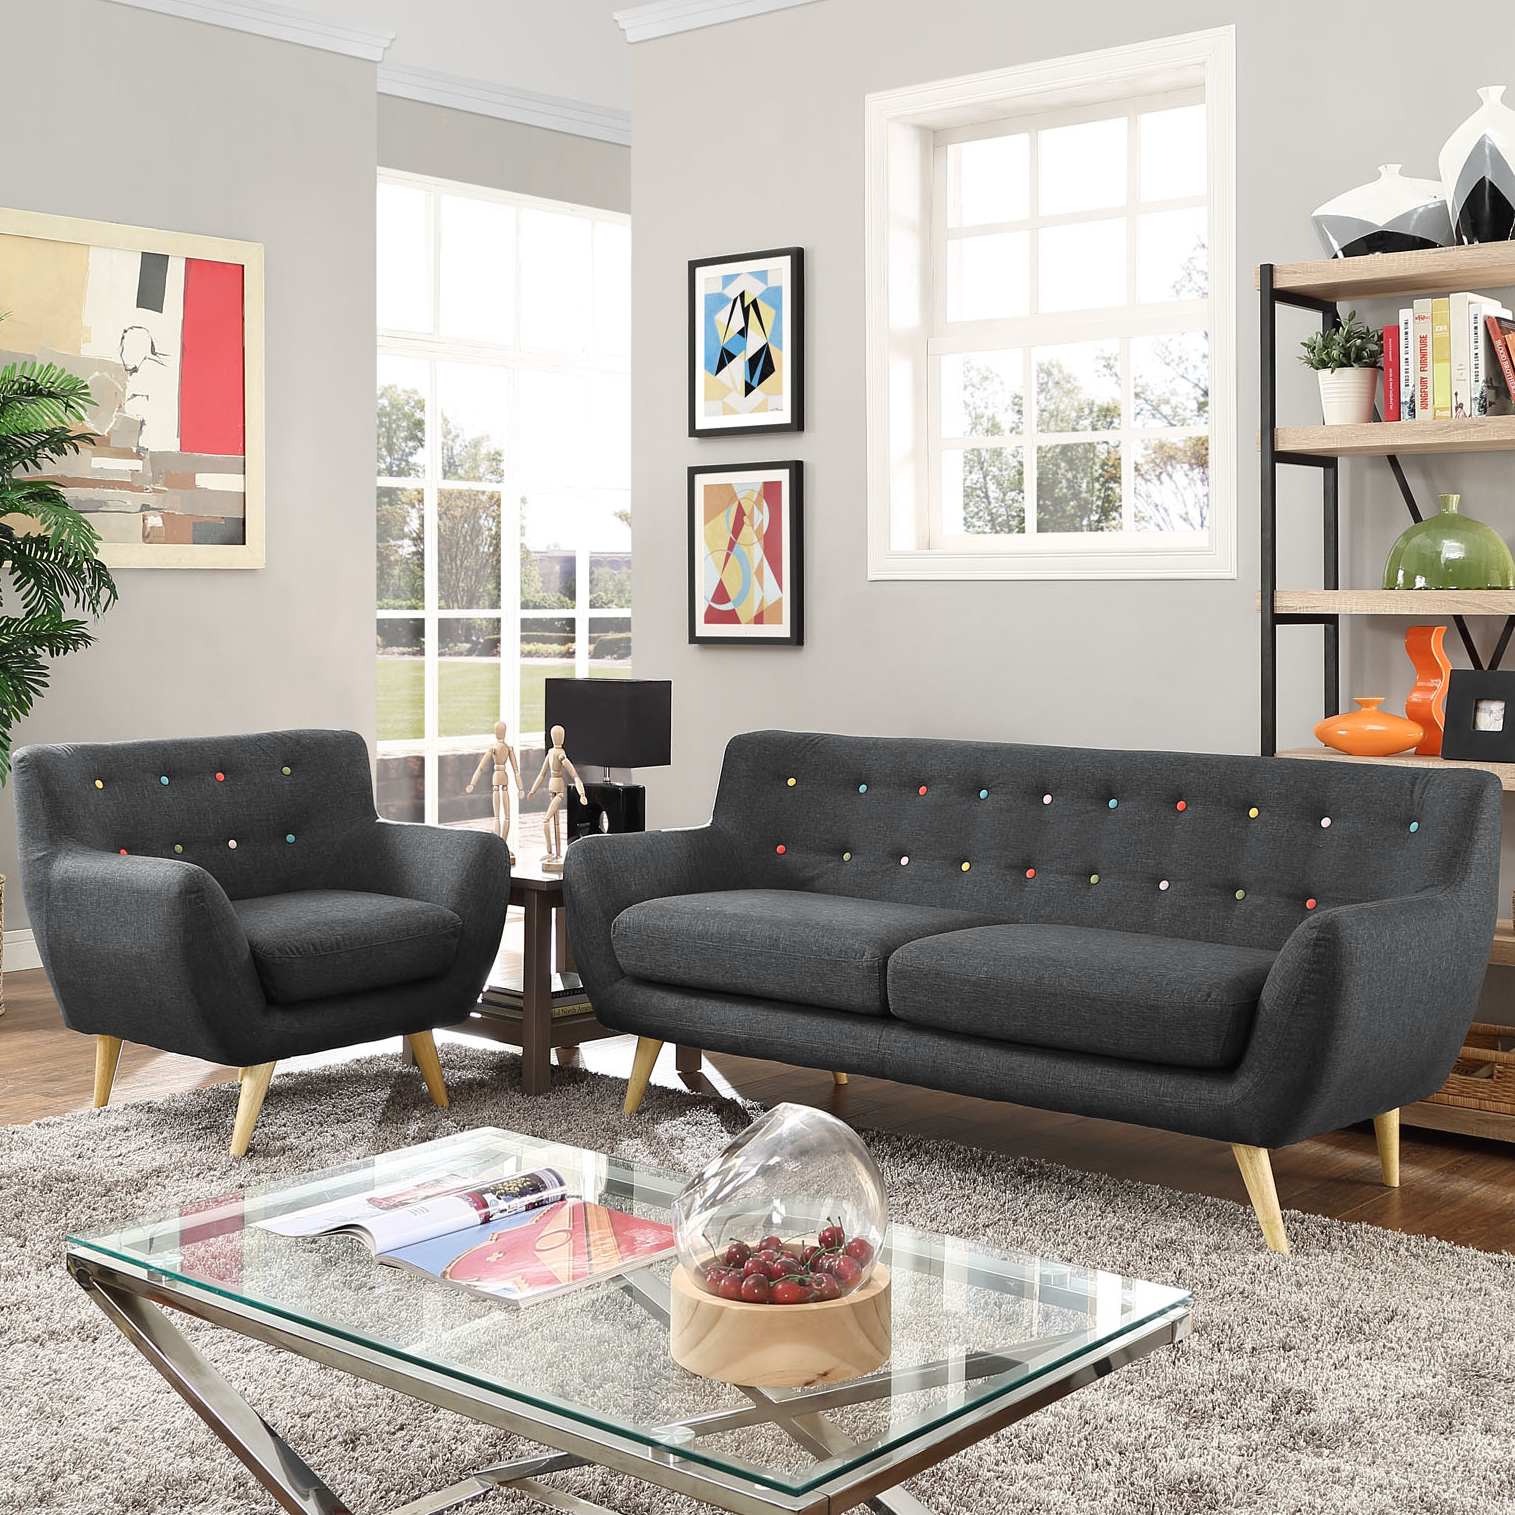 Couch For Living Room : Pictures, Ideas